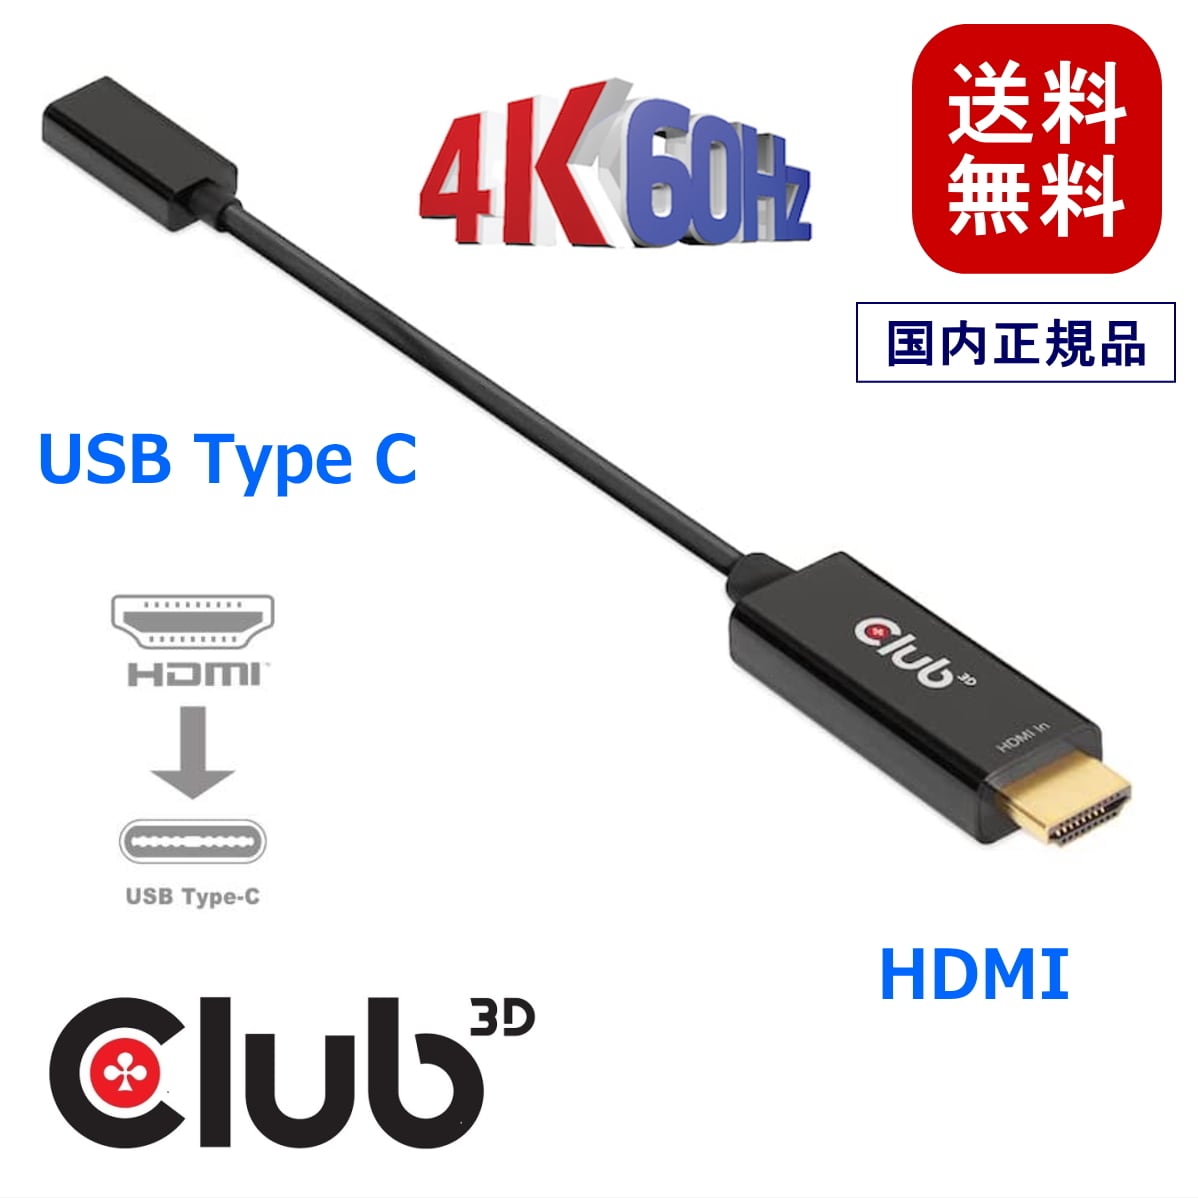 CAC-1333】Club 3D HDMI Male オス to Type C Female メス アクティブ アダプタ 4K@60Hz (CAC-1333) | BearHouse